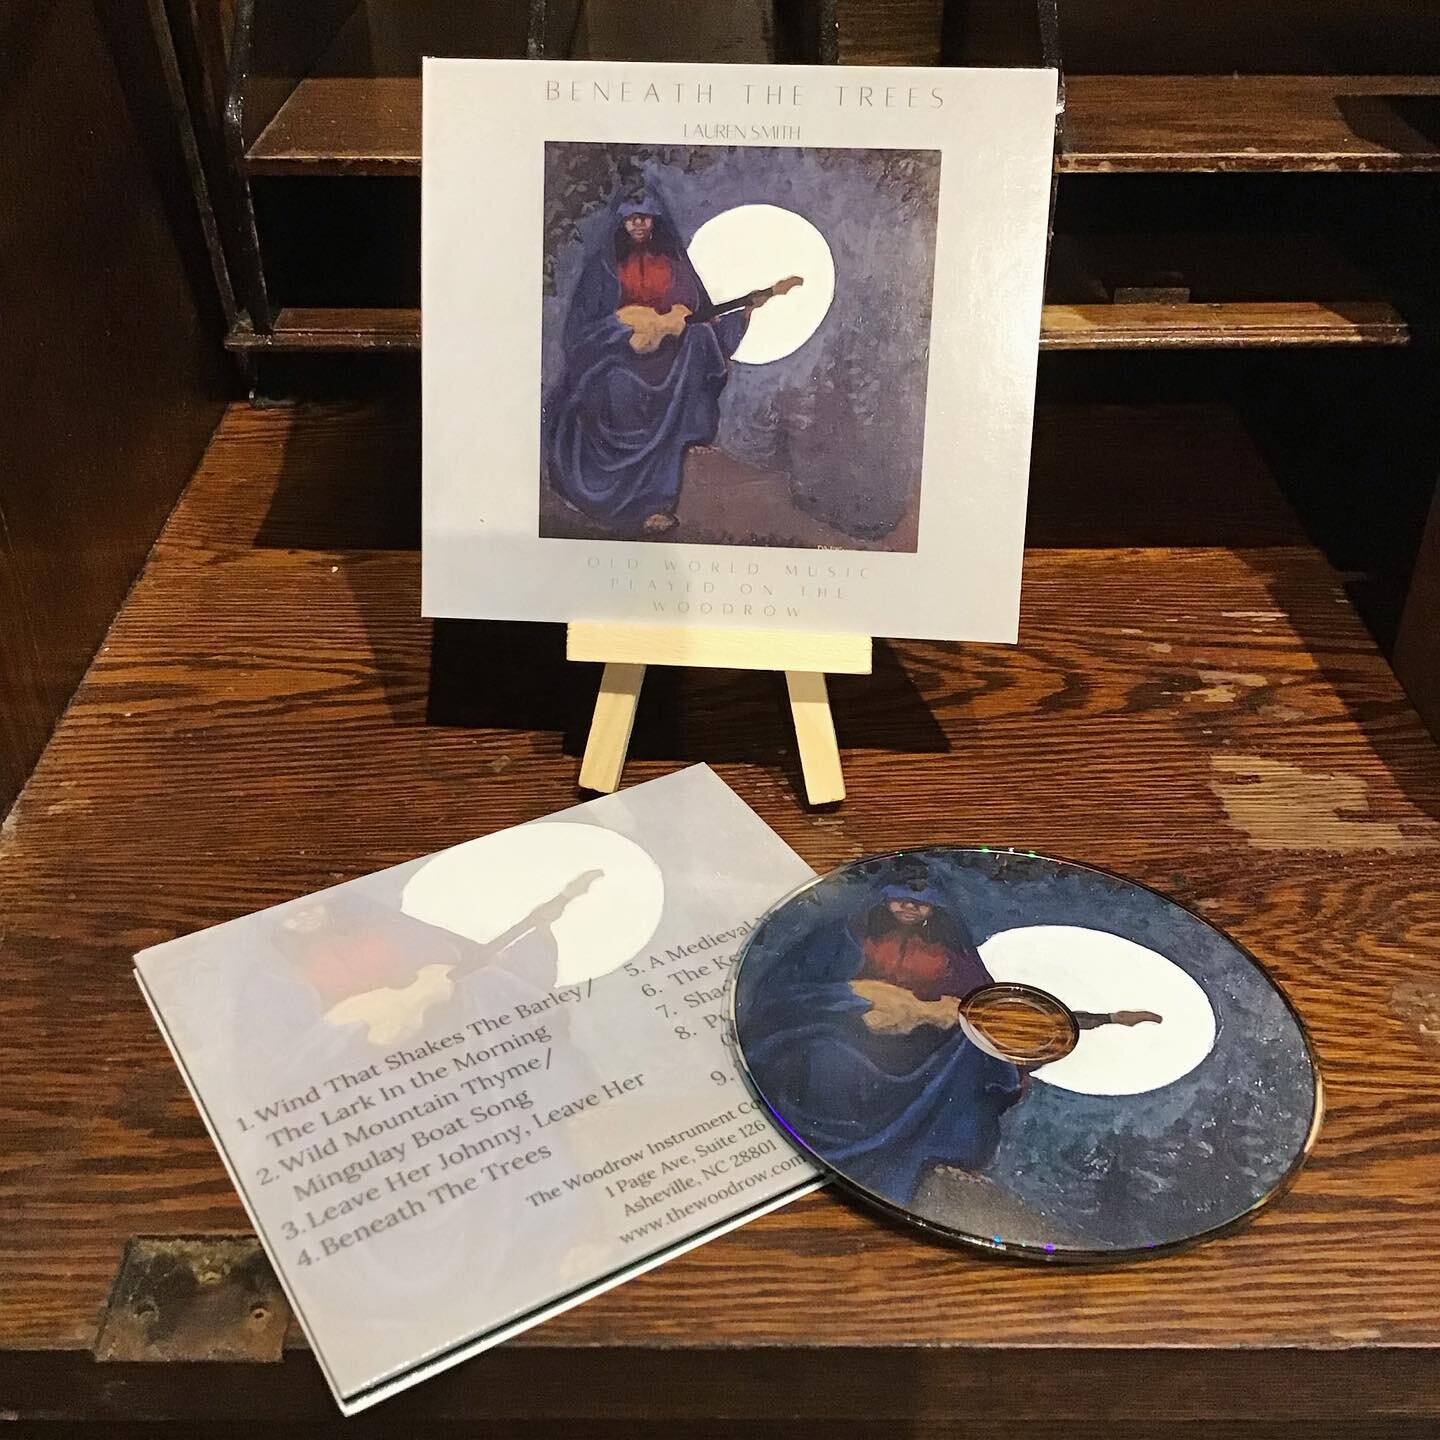 🎶 New CD Release! 🎶

We&rsquo;d like to introduce our first full album performed on the Woodrow- &ldquo;Beneath The Trees- Old World Music Played On The Woodrow.&rdquo; Each CD comes with a digital download of a fully-notated song book so you can l